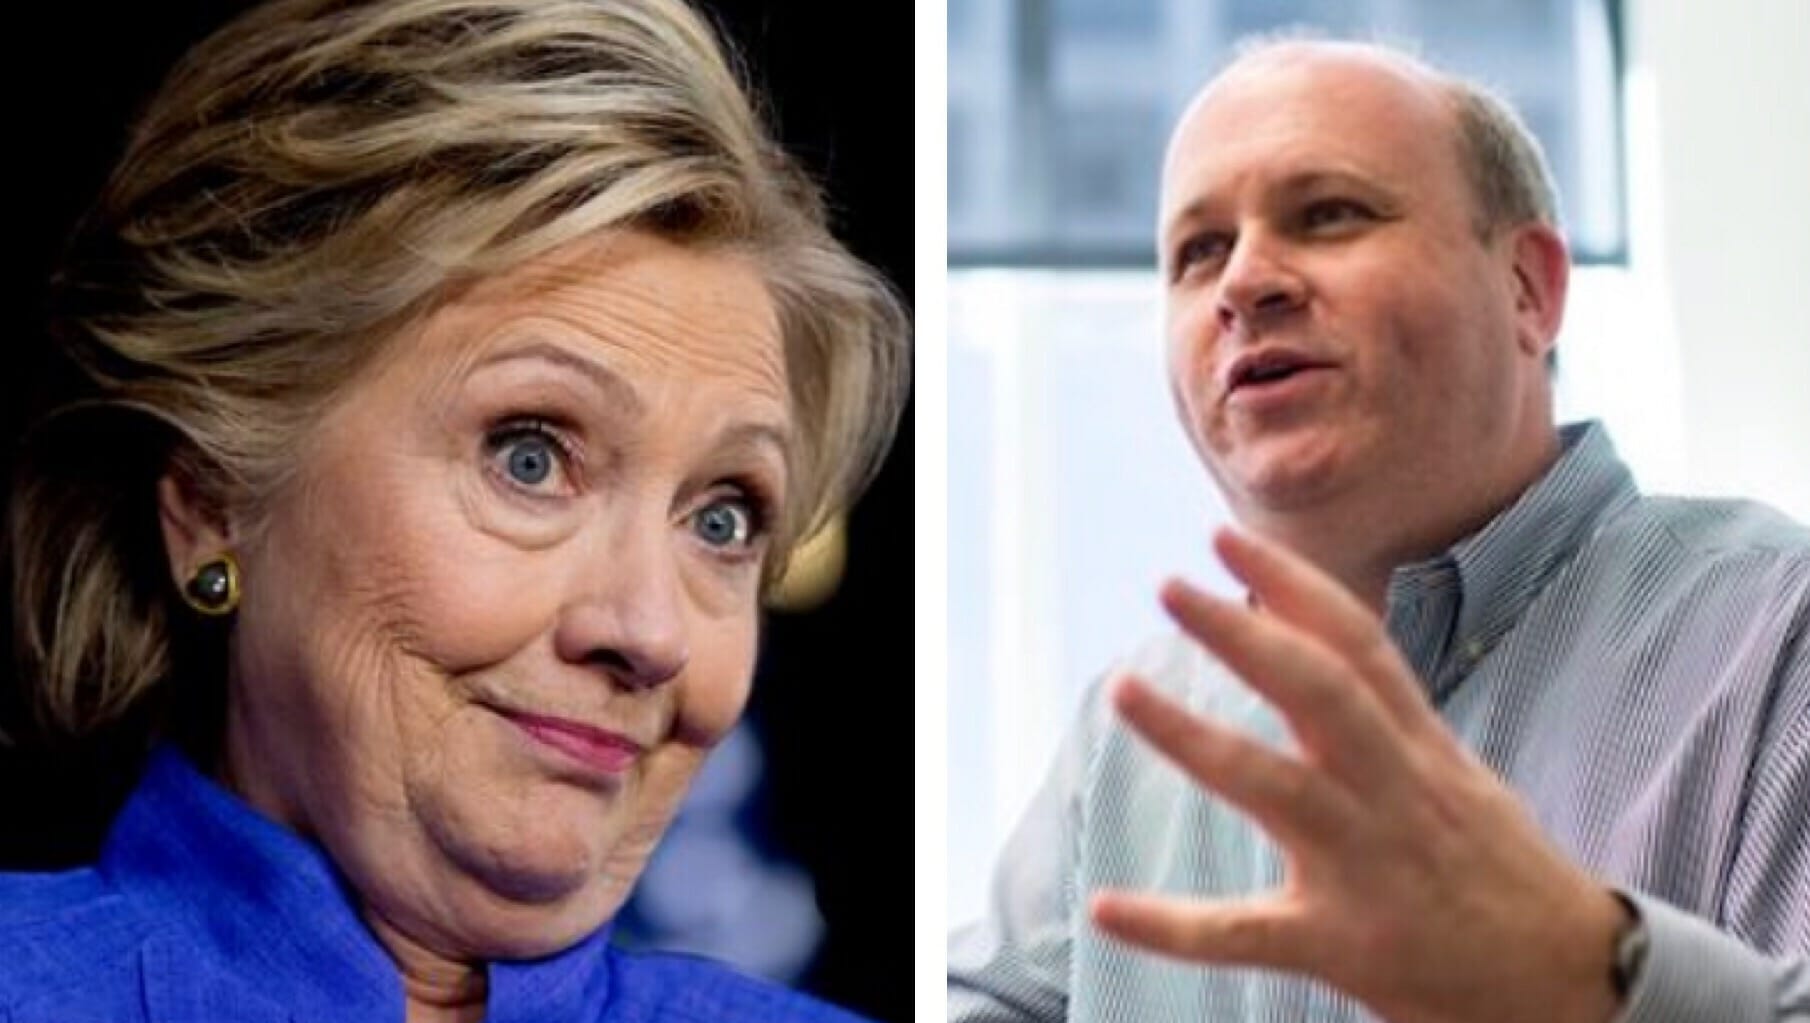 Hillary’s Nasty Attorney Marc Elias Is Called Out in Another Court – “Elias’s Tactics Are Now Drawing Rebukes from Judges, Prosecutors and Even Fellow Democrats”